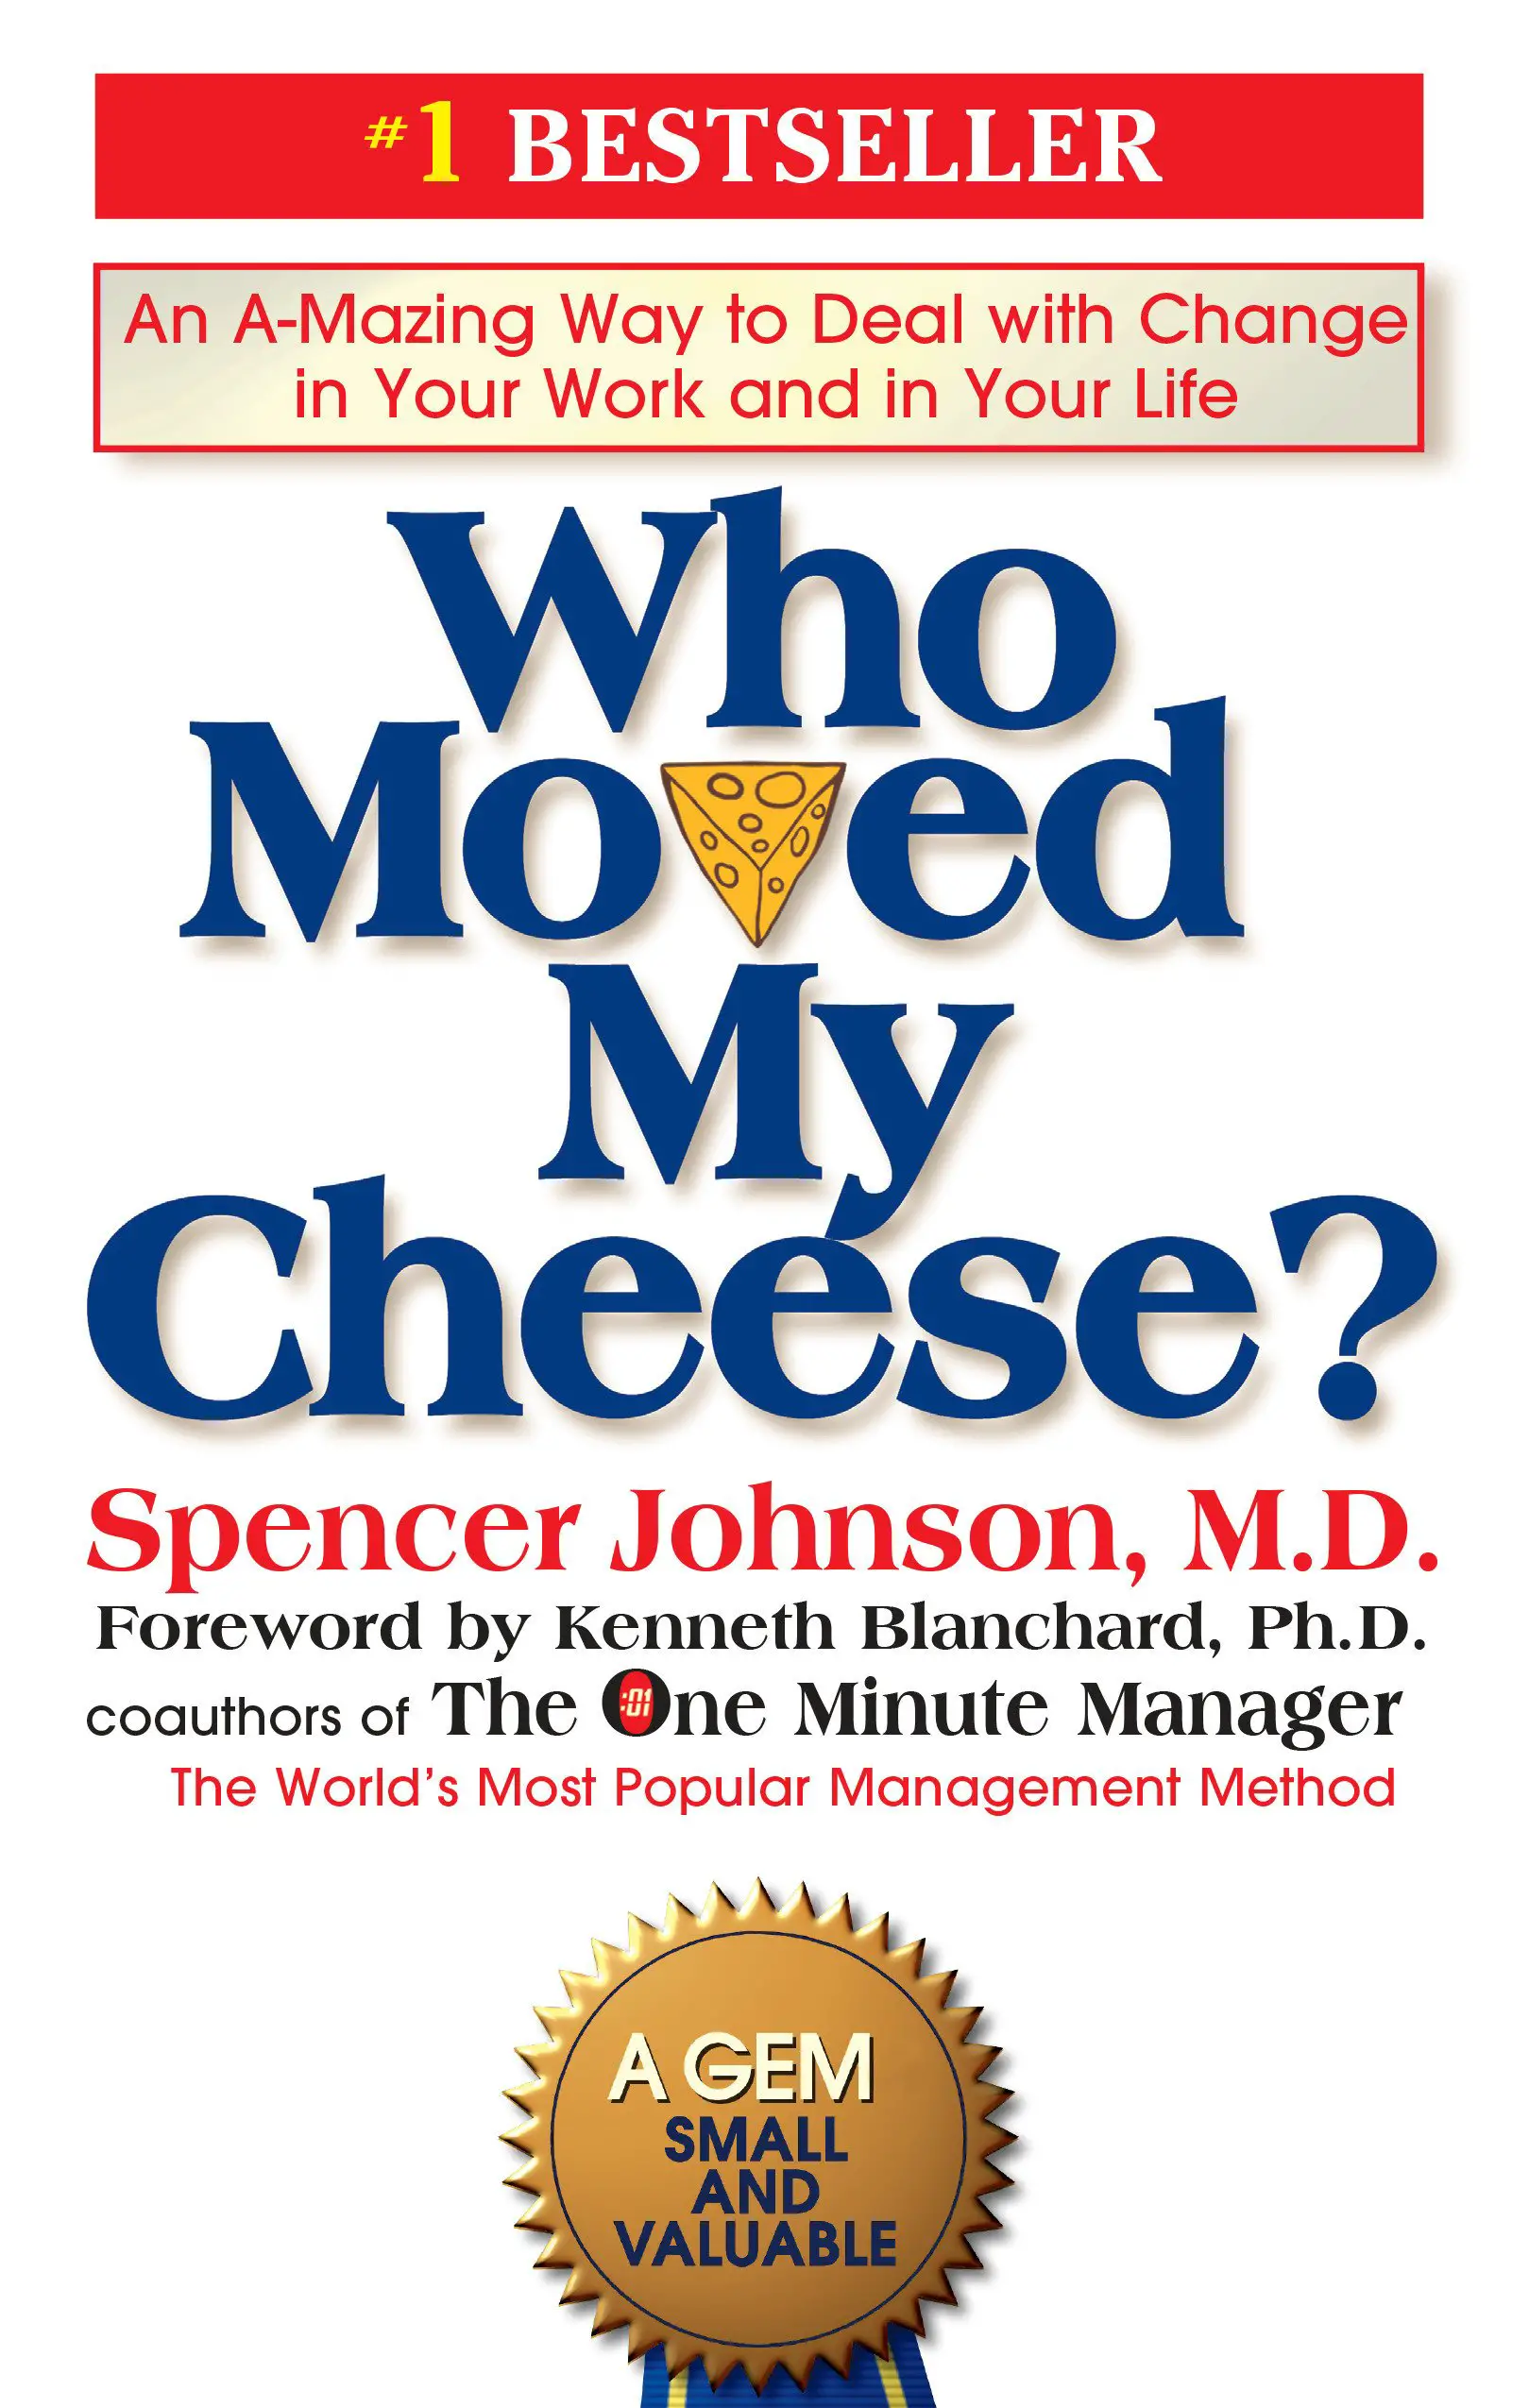 Book review who moved my cheese pdf, multiplyillustration.com